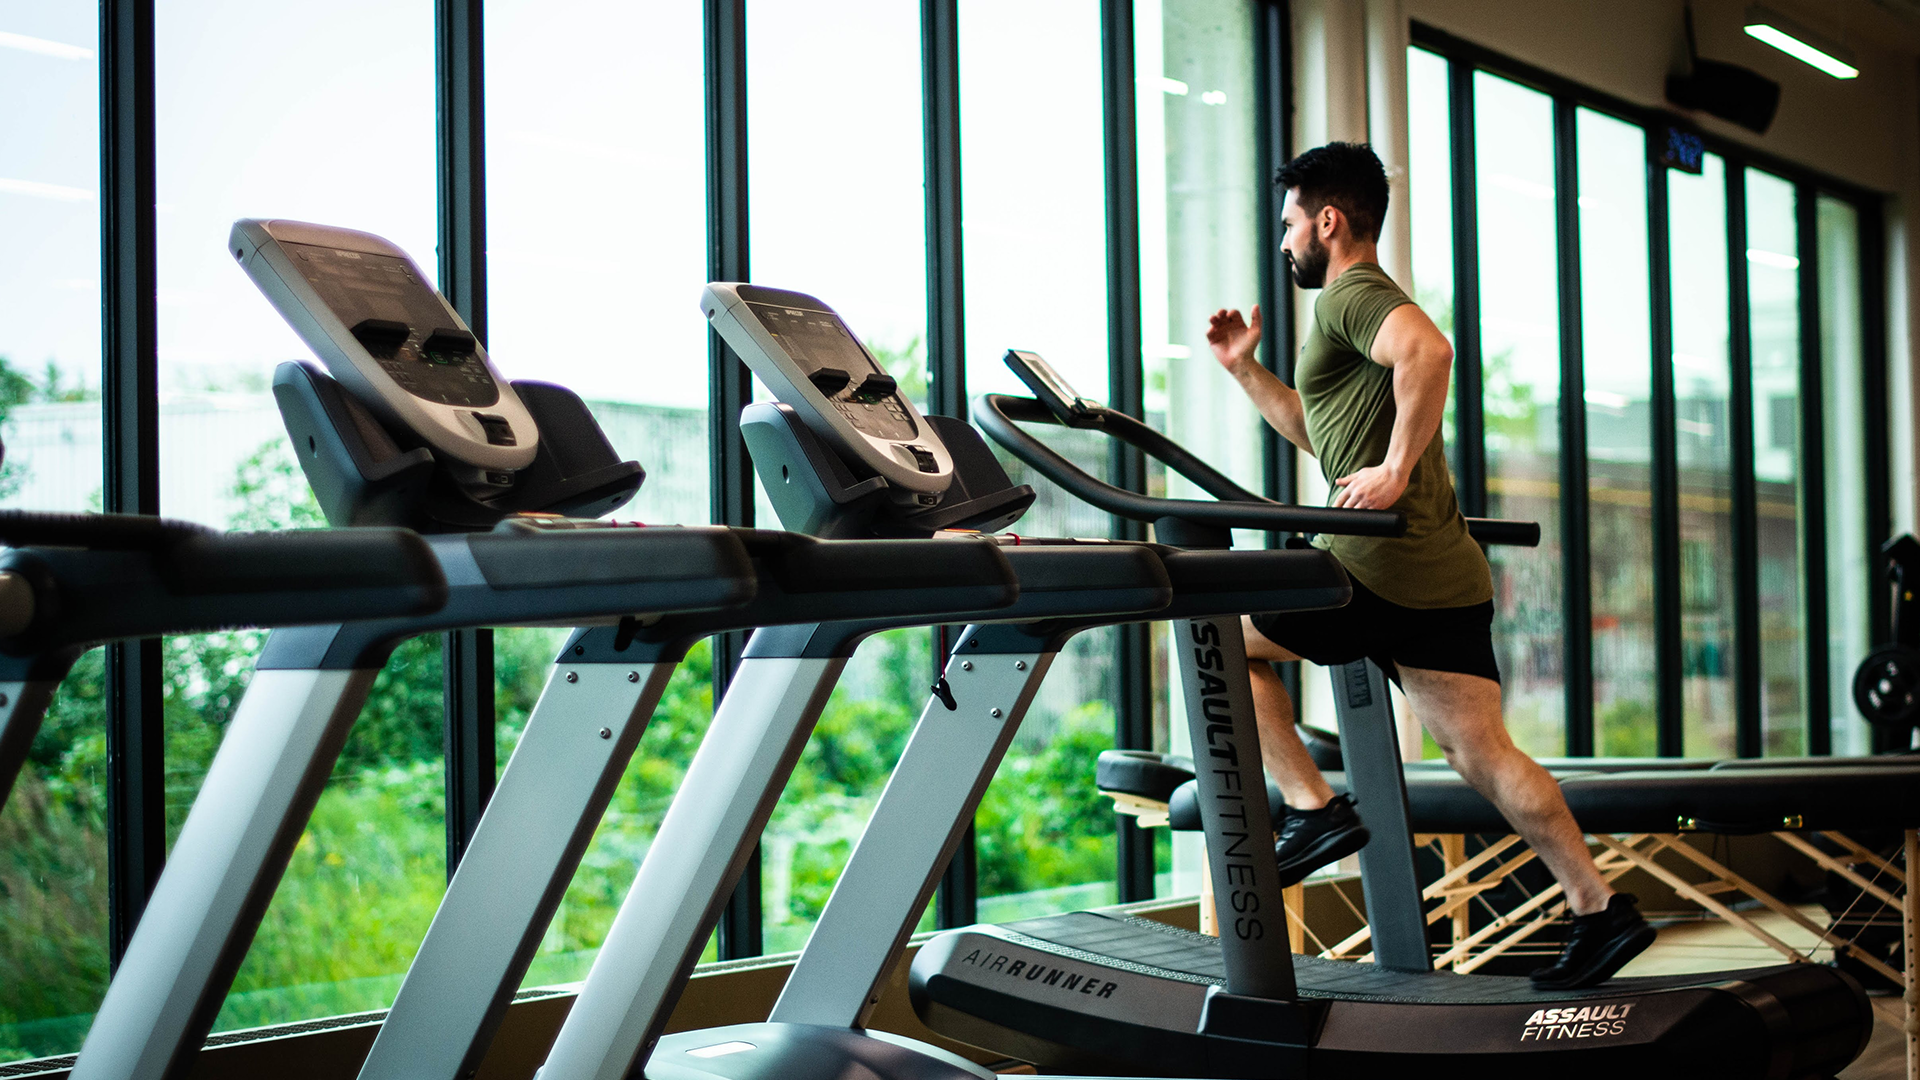 Image of a man in a gym running on a treadmill